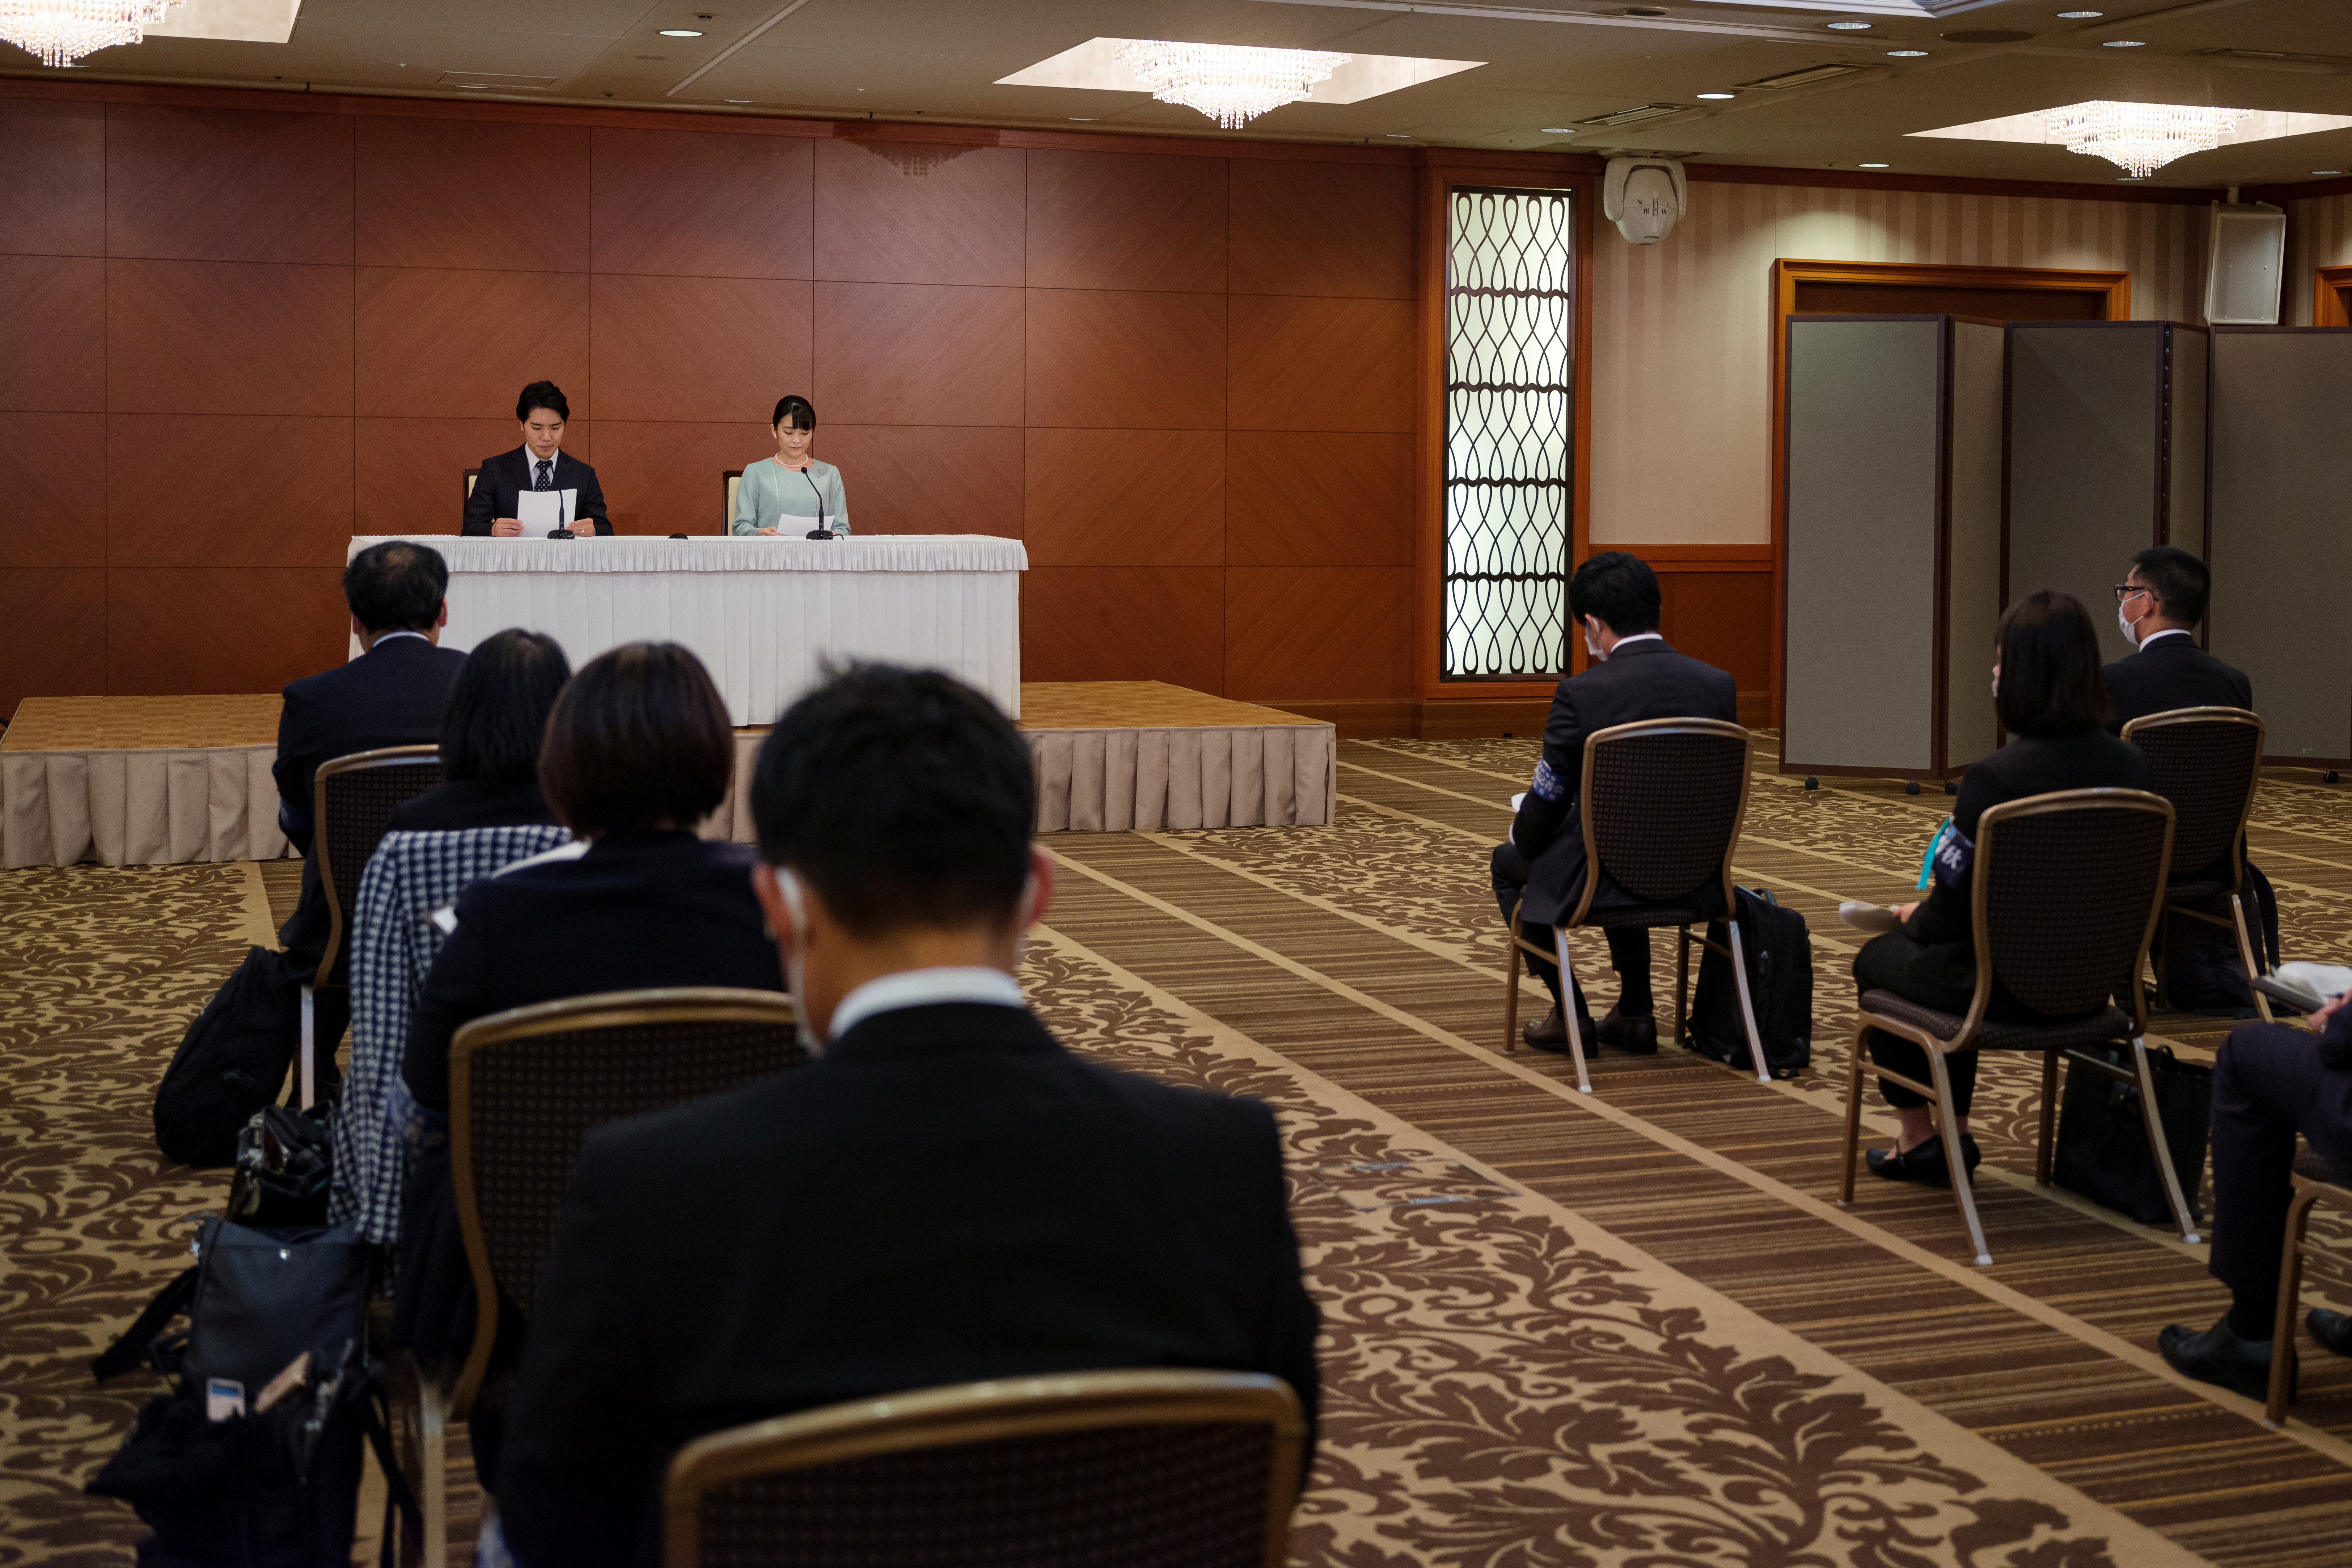 Japan's Princess Mako and her husband Kei Komuro attend a news conference to announce their marriage registration at Grand Arc Hotel in Tokyo, Japan, October 26, 2021. Nicolas Datiche/Pool via REUTERS